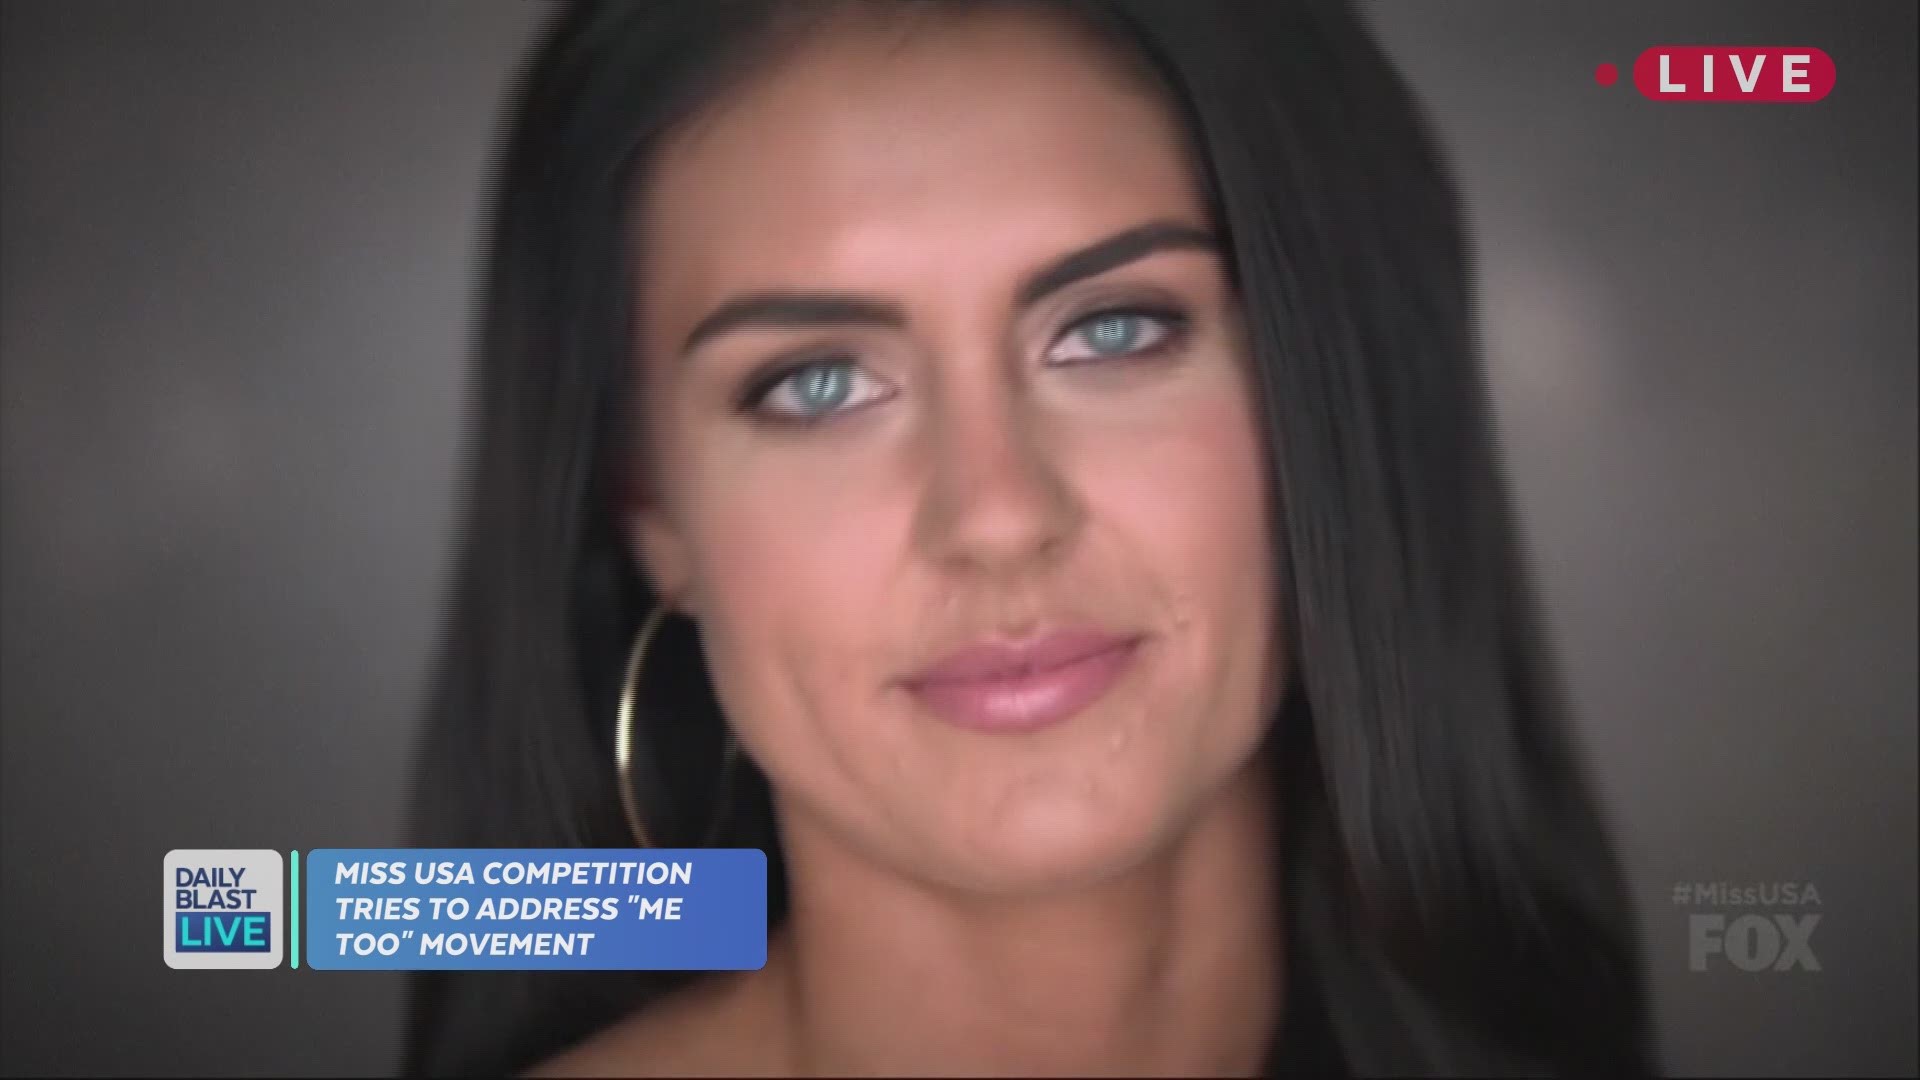 Last night was the Miss USA competition and Miss Nebraska, Sarah Rose Summers, took home the top prize, but everyone was talking about the #MeToo moment. Contestants were sat down and asked if they had ever experienced sexual assault and many shared their